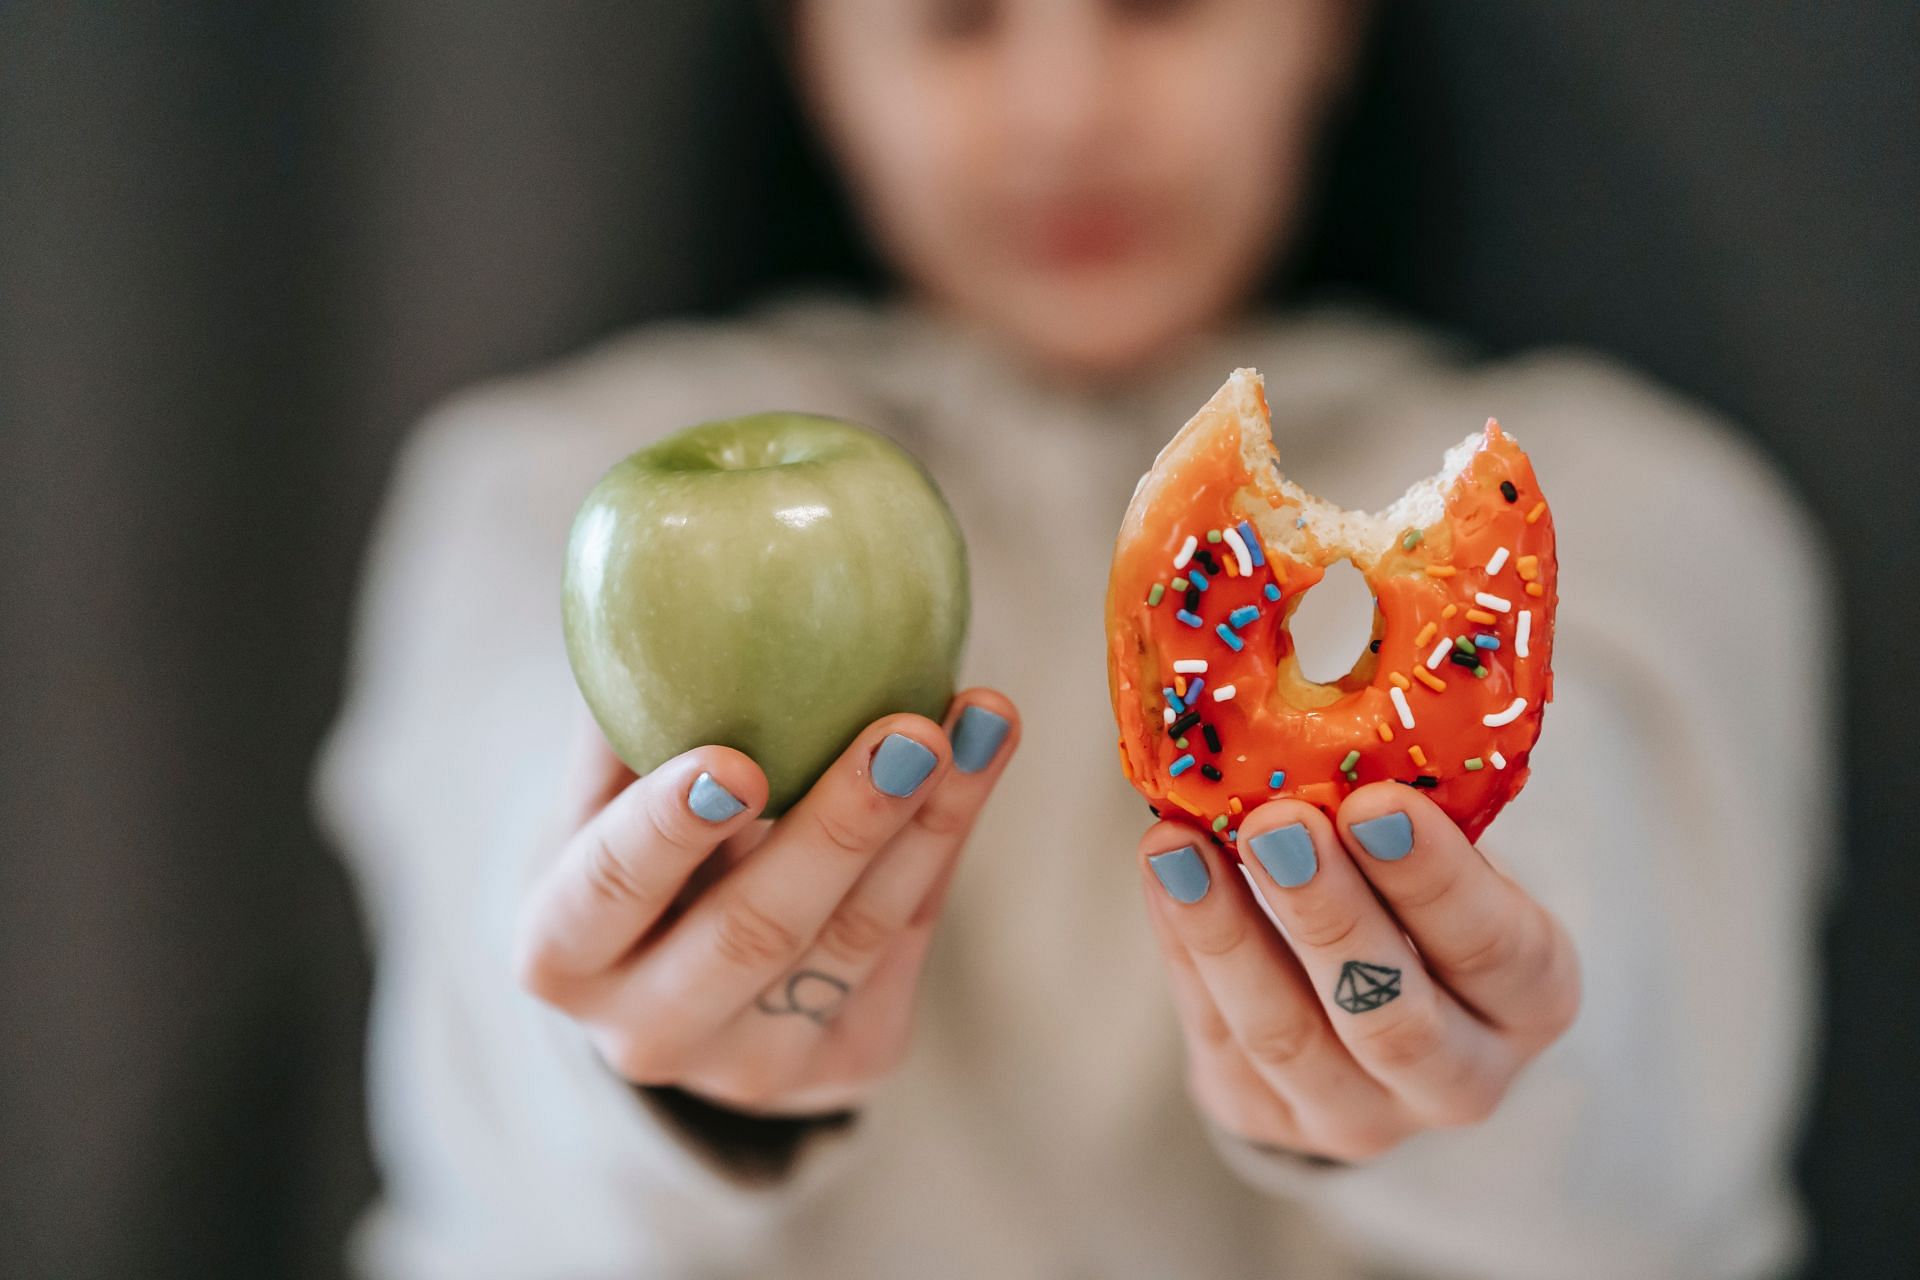 Benefits of a balanced diet (Image via Pexels/Photo by Andres Aryton)